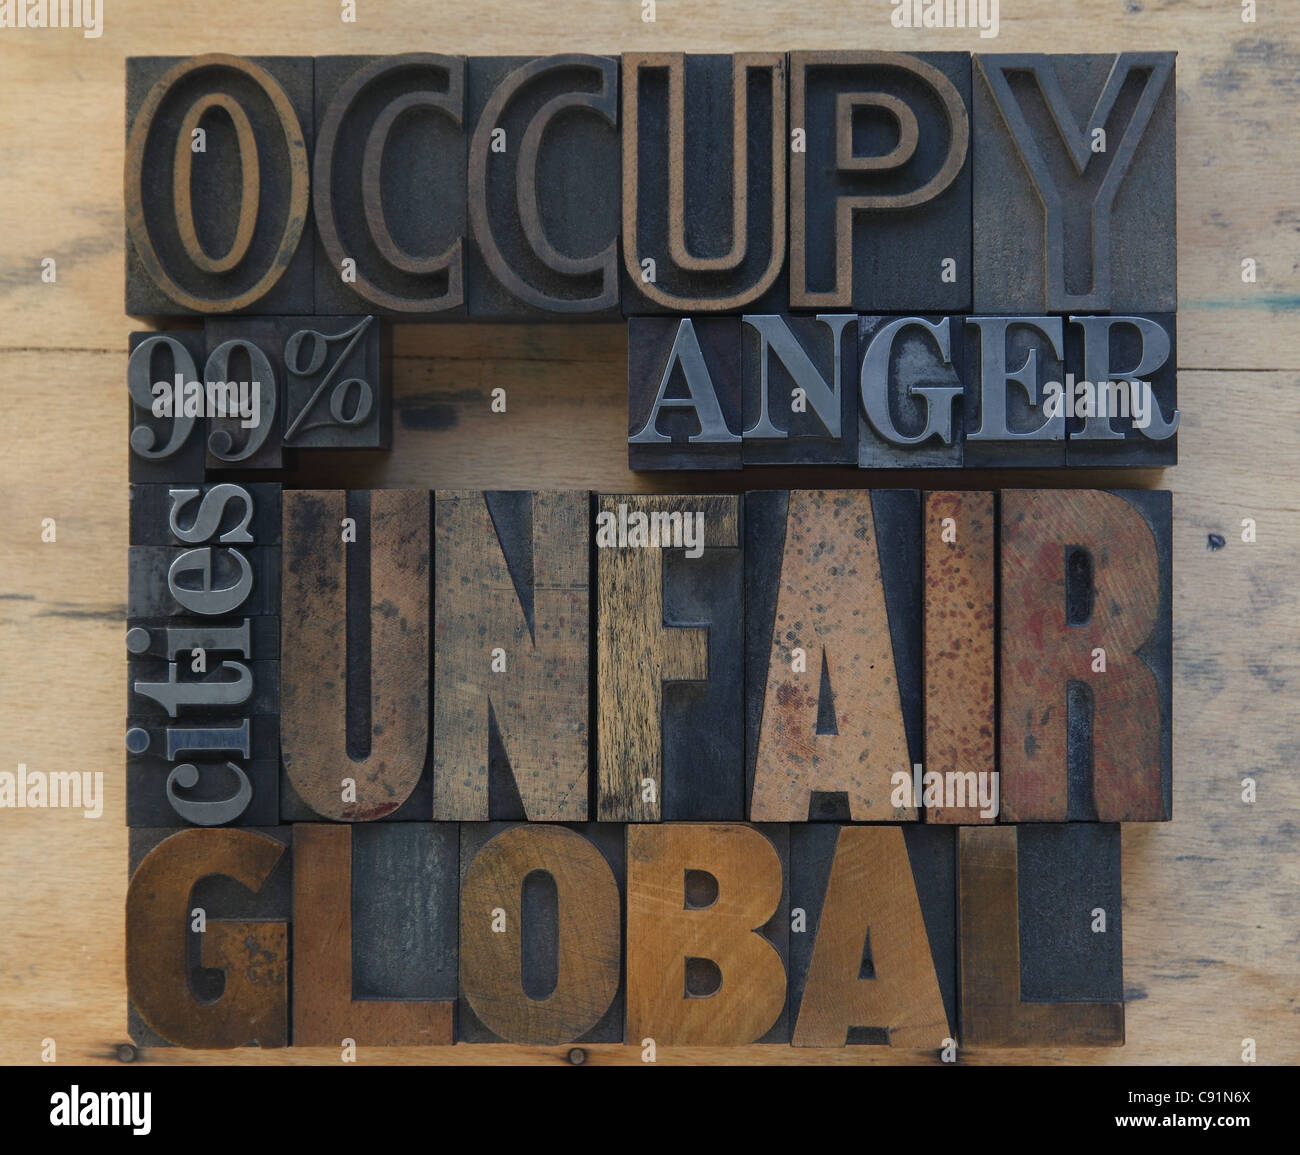 words related to the Occupy Wall Street movement Stock Photo